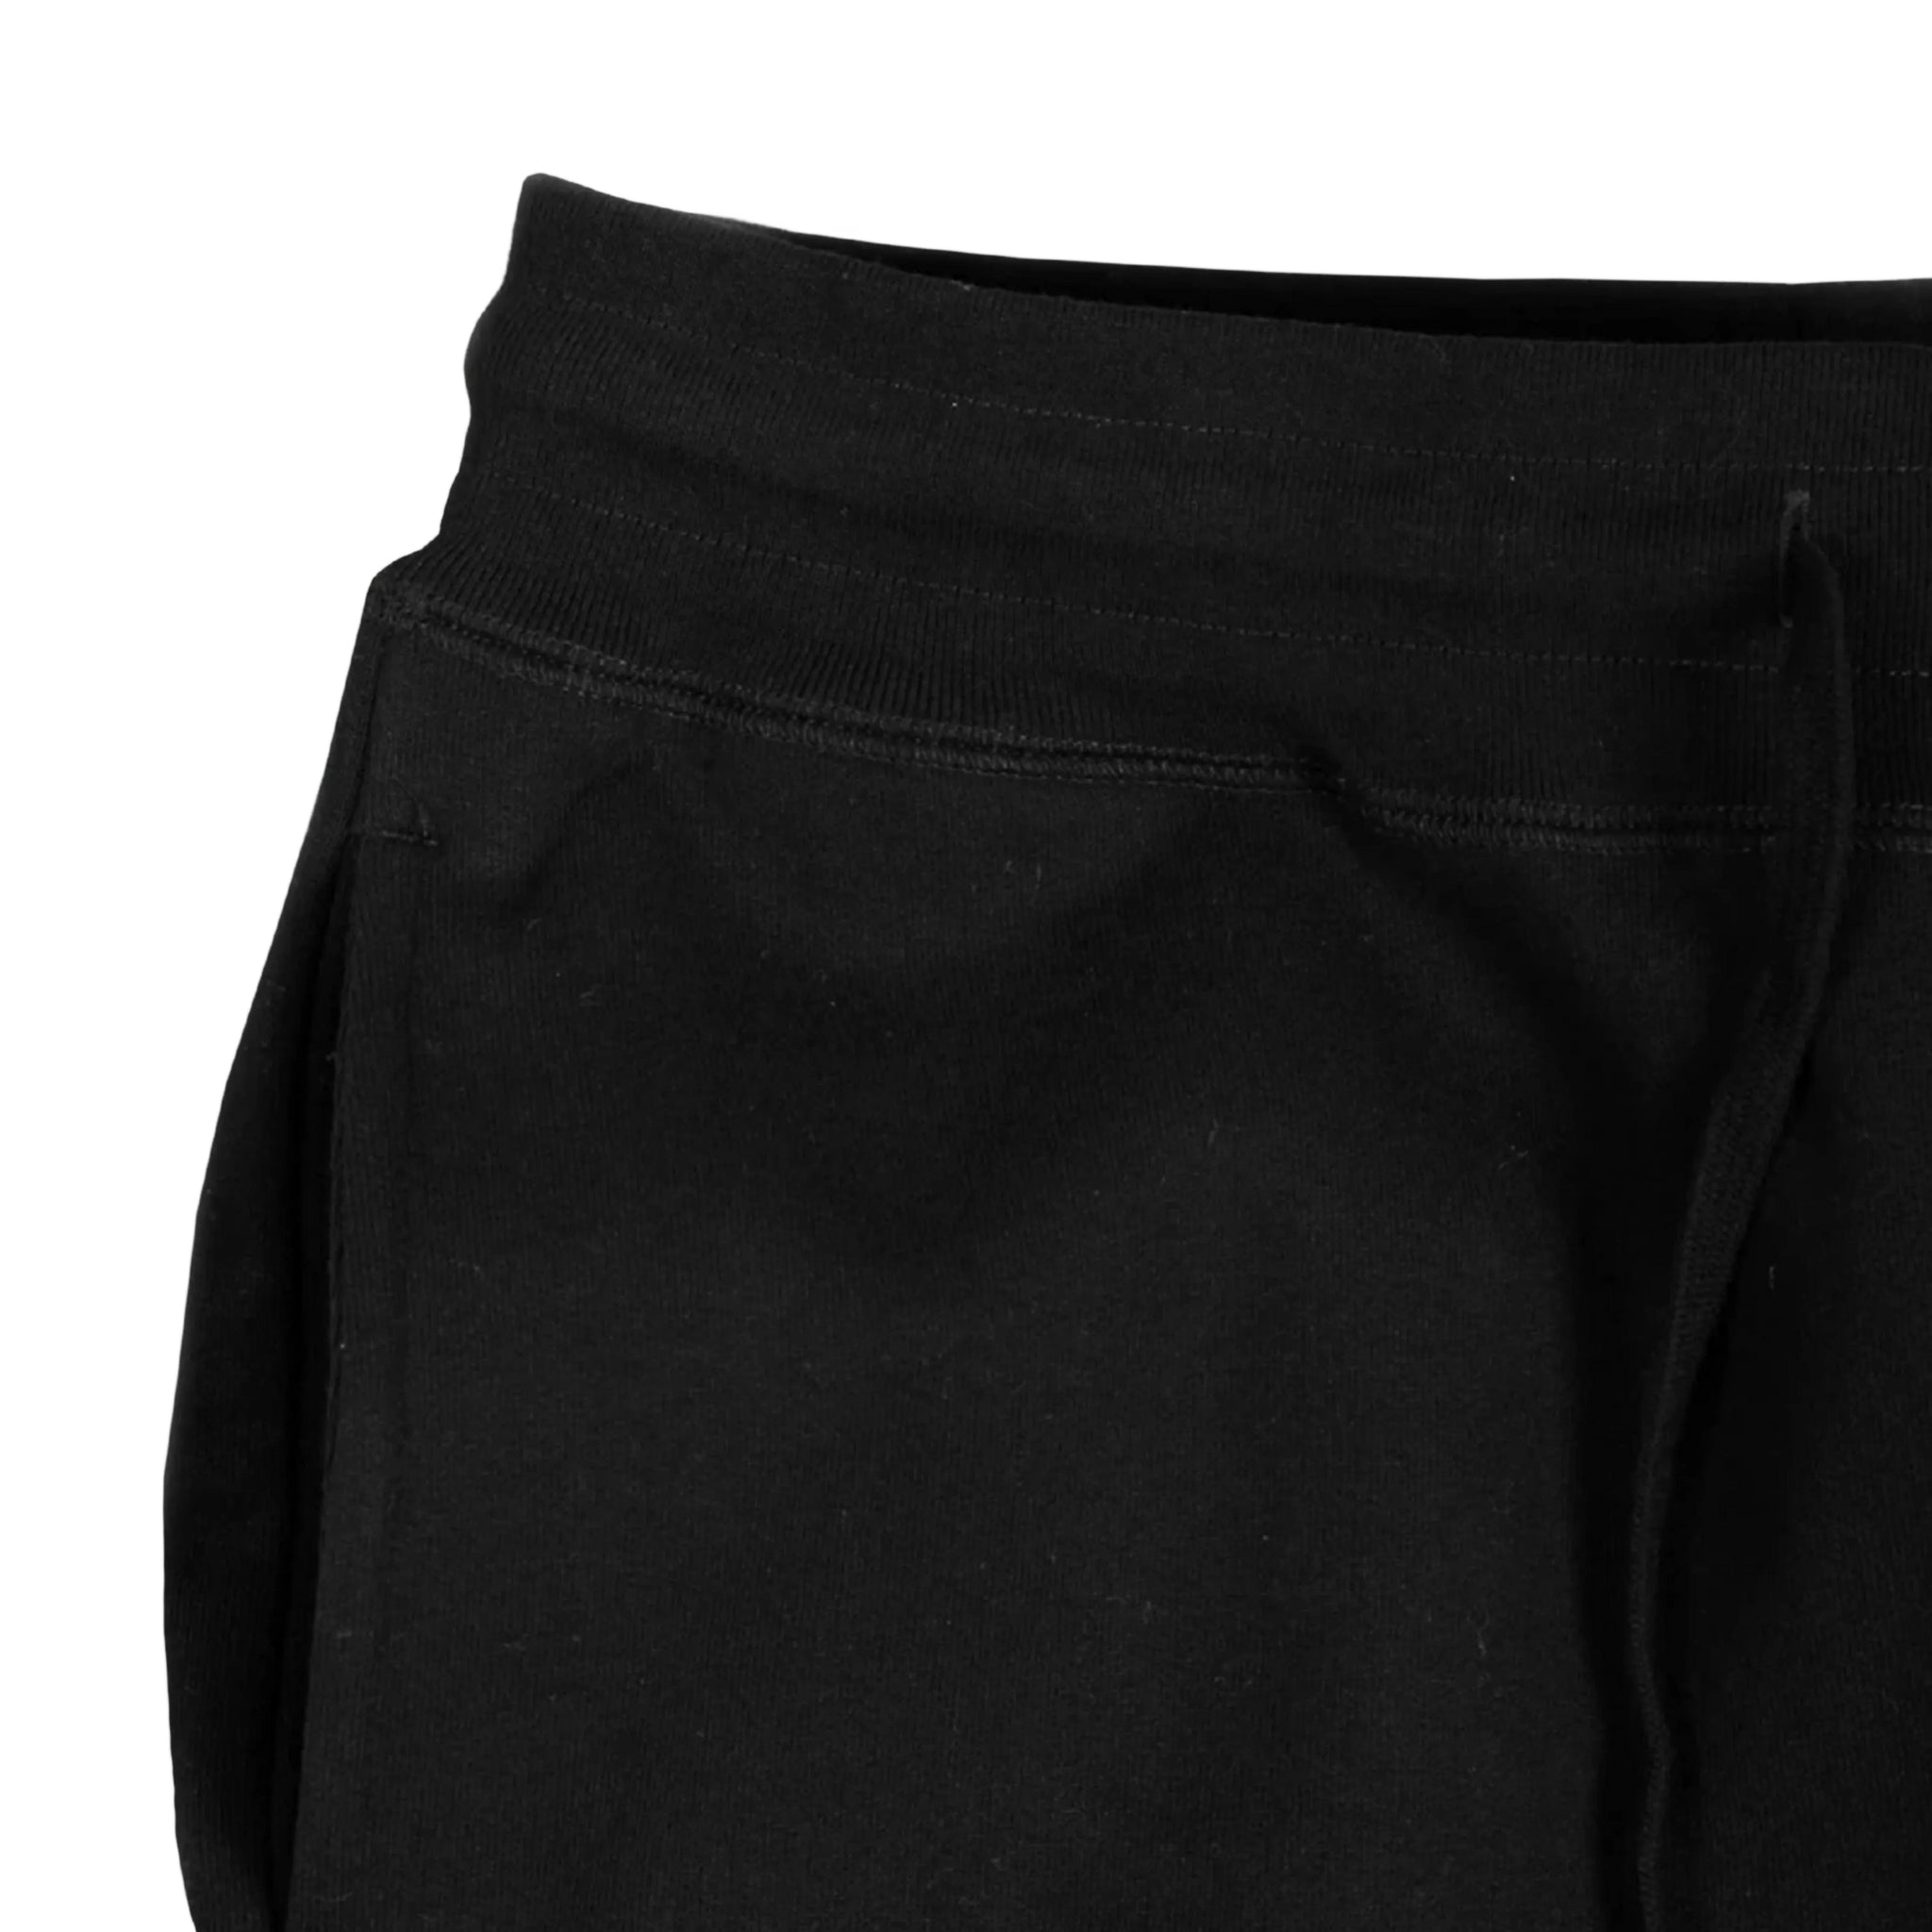 close up view of black heavyweight knit joggers against white background